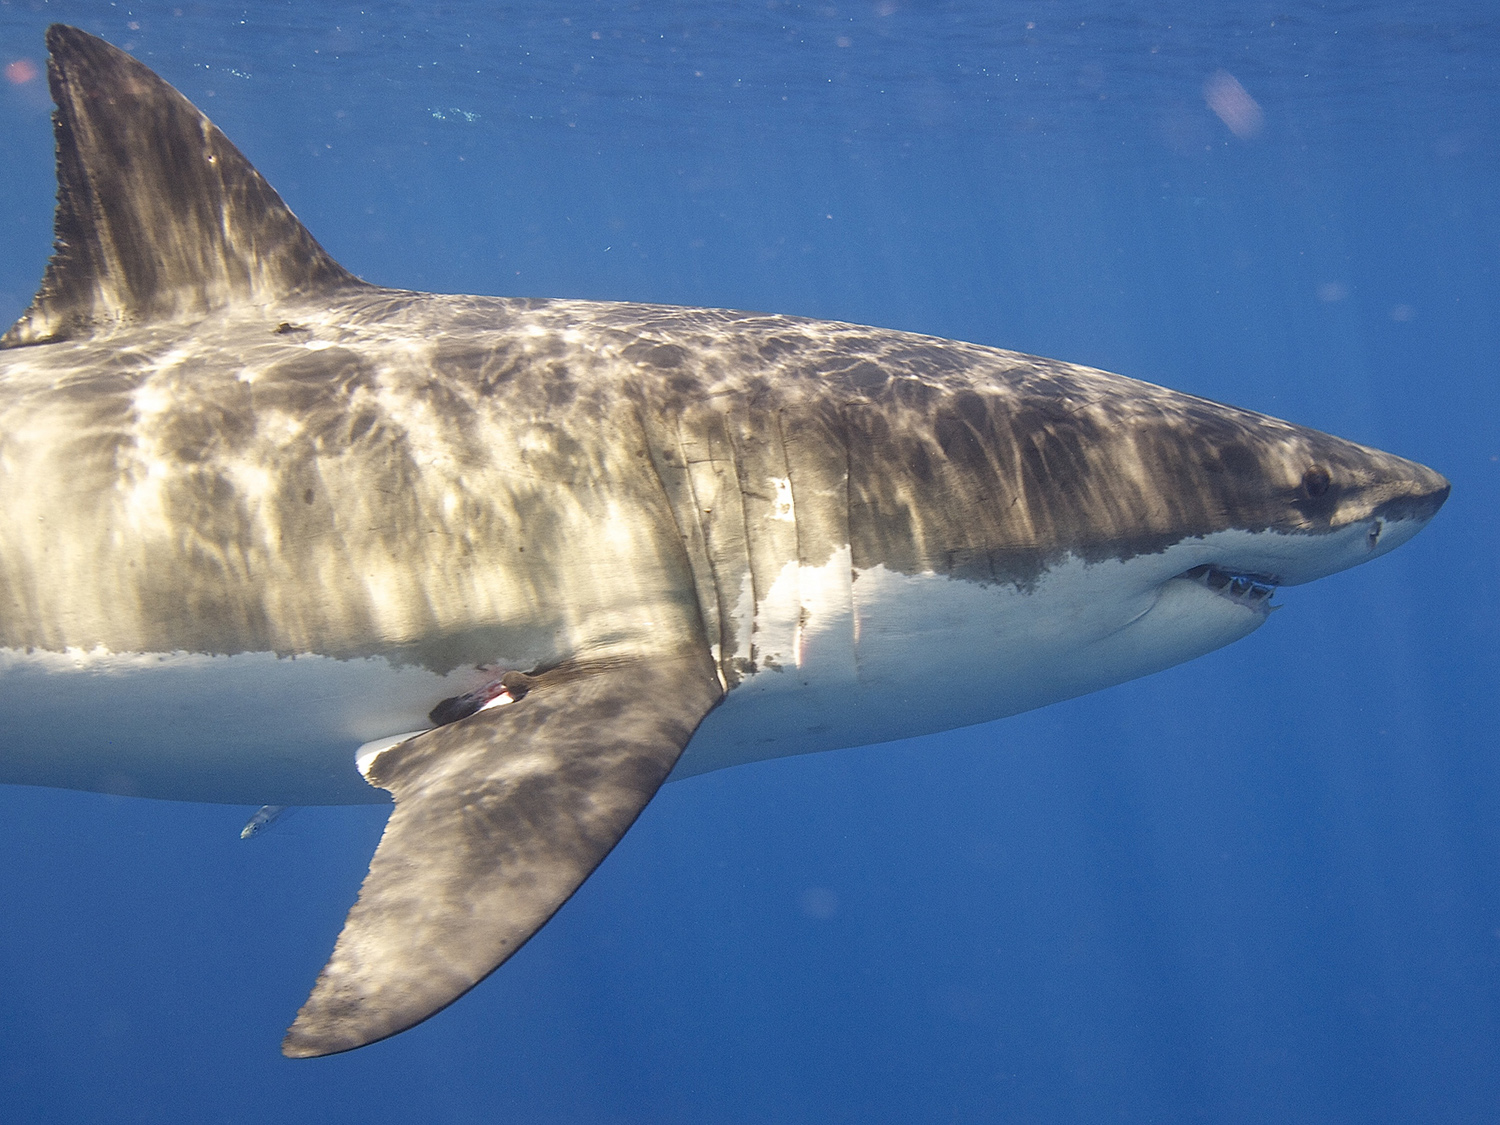 Great White Shark. Photo credit: Elias Levy via Foter.com / CC BY